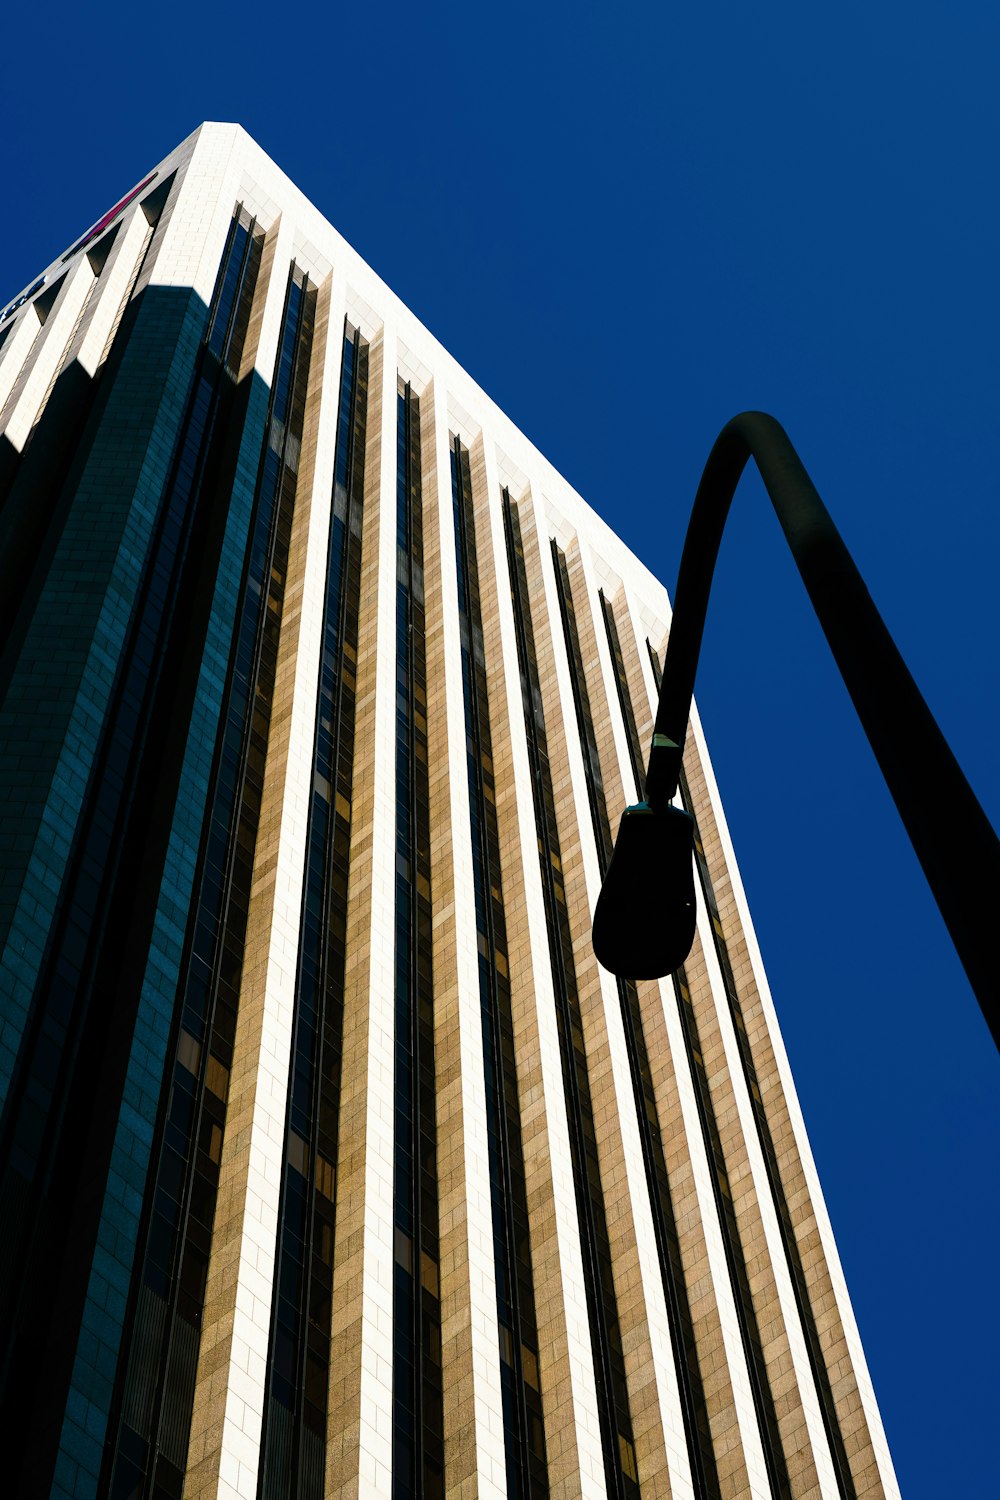 a street light in front of a tall building